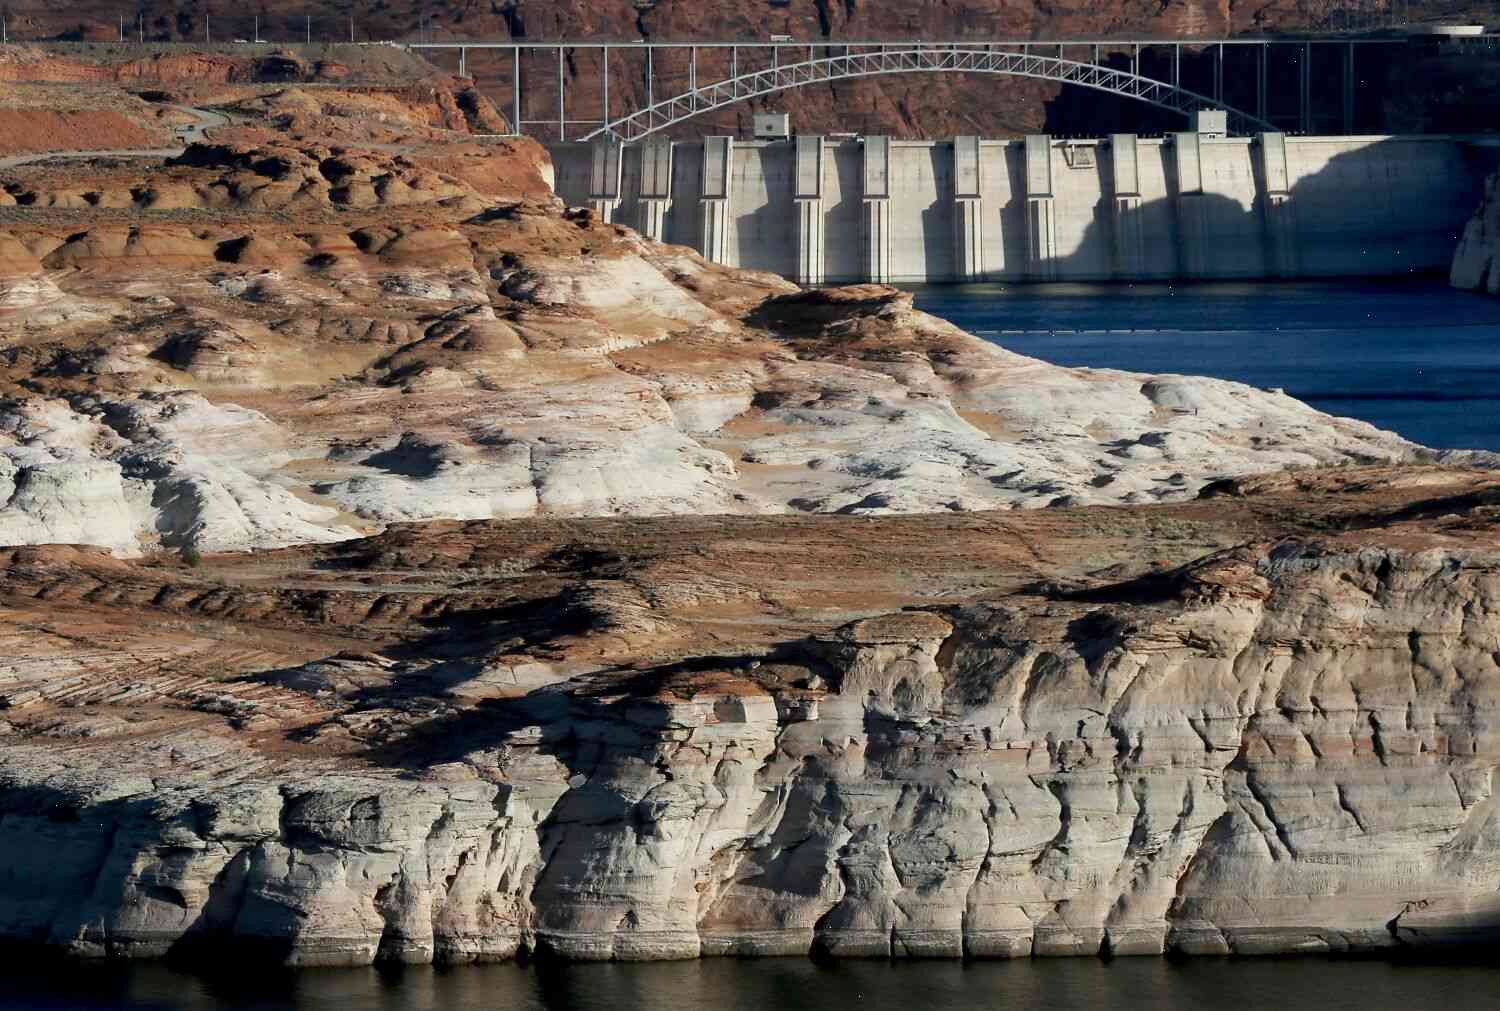 California considering $1.2 billion for a deep water channel to carry more water to the water state